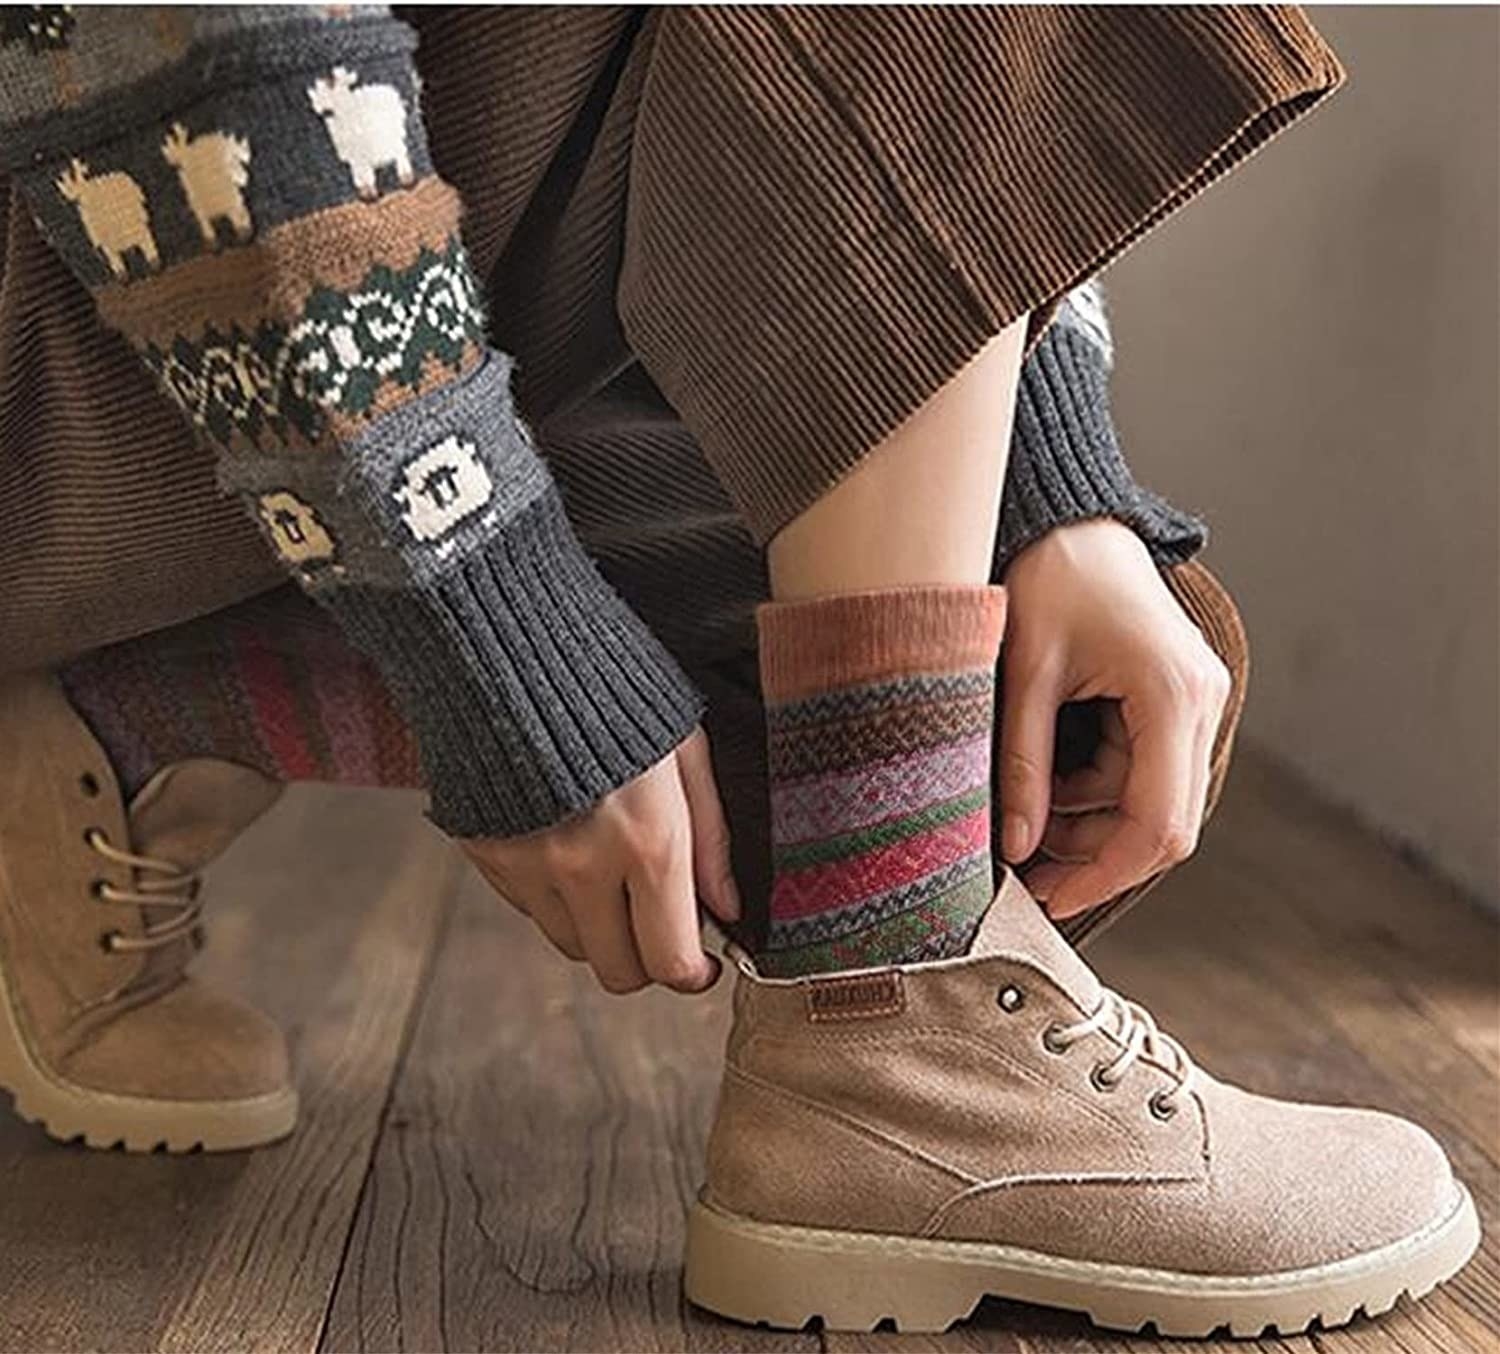 thick socks with classic sweater pattern